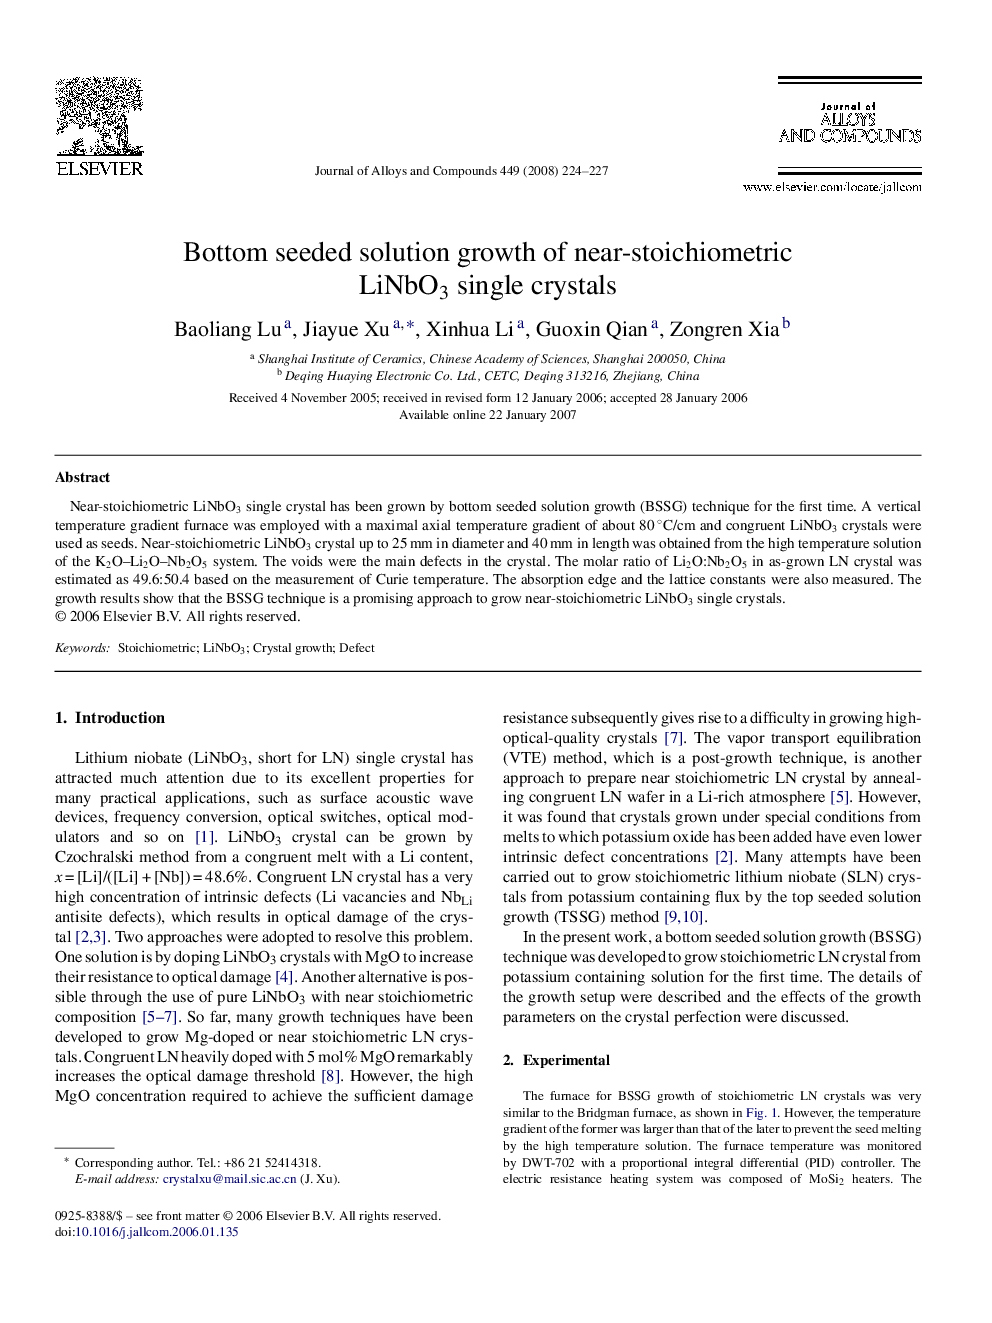 Bottom seeded solution growth of near-stoichiometric LiNbO3 single crystals